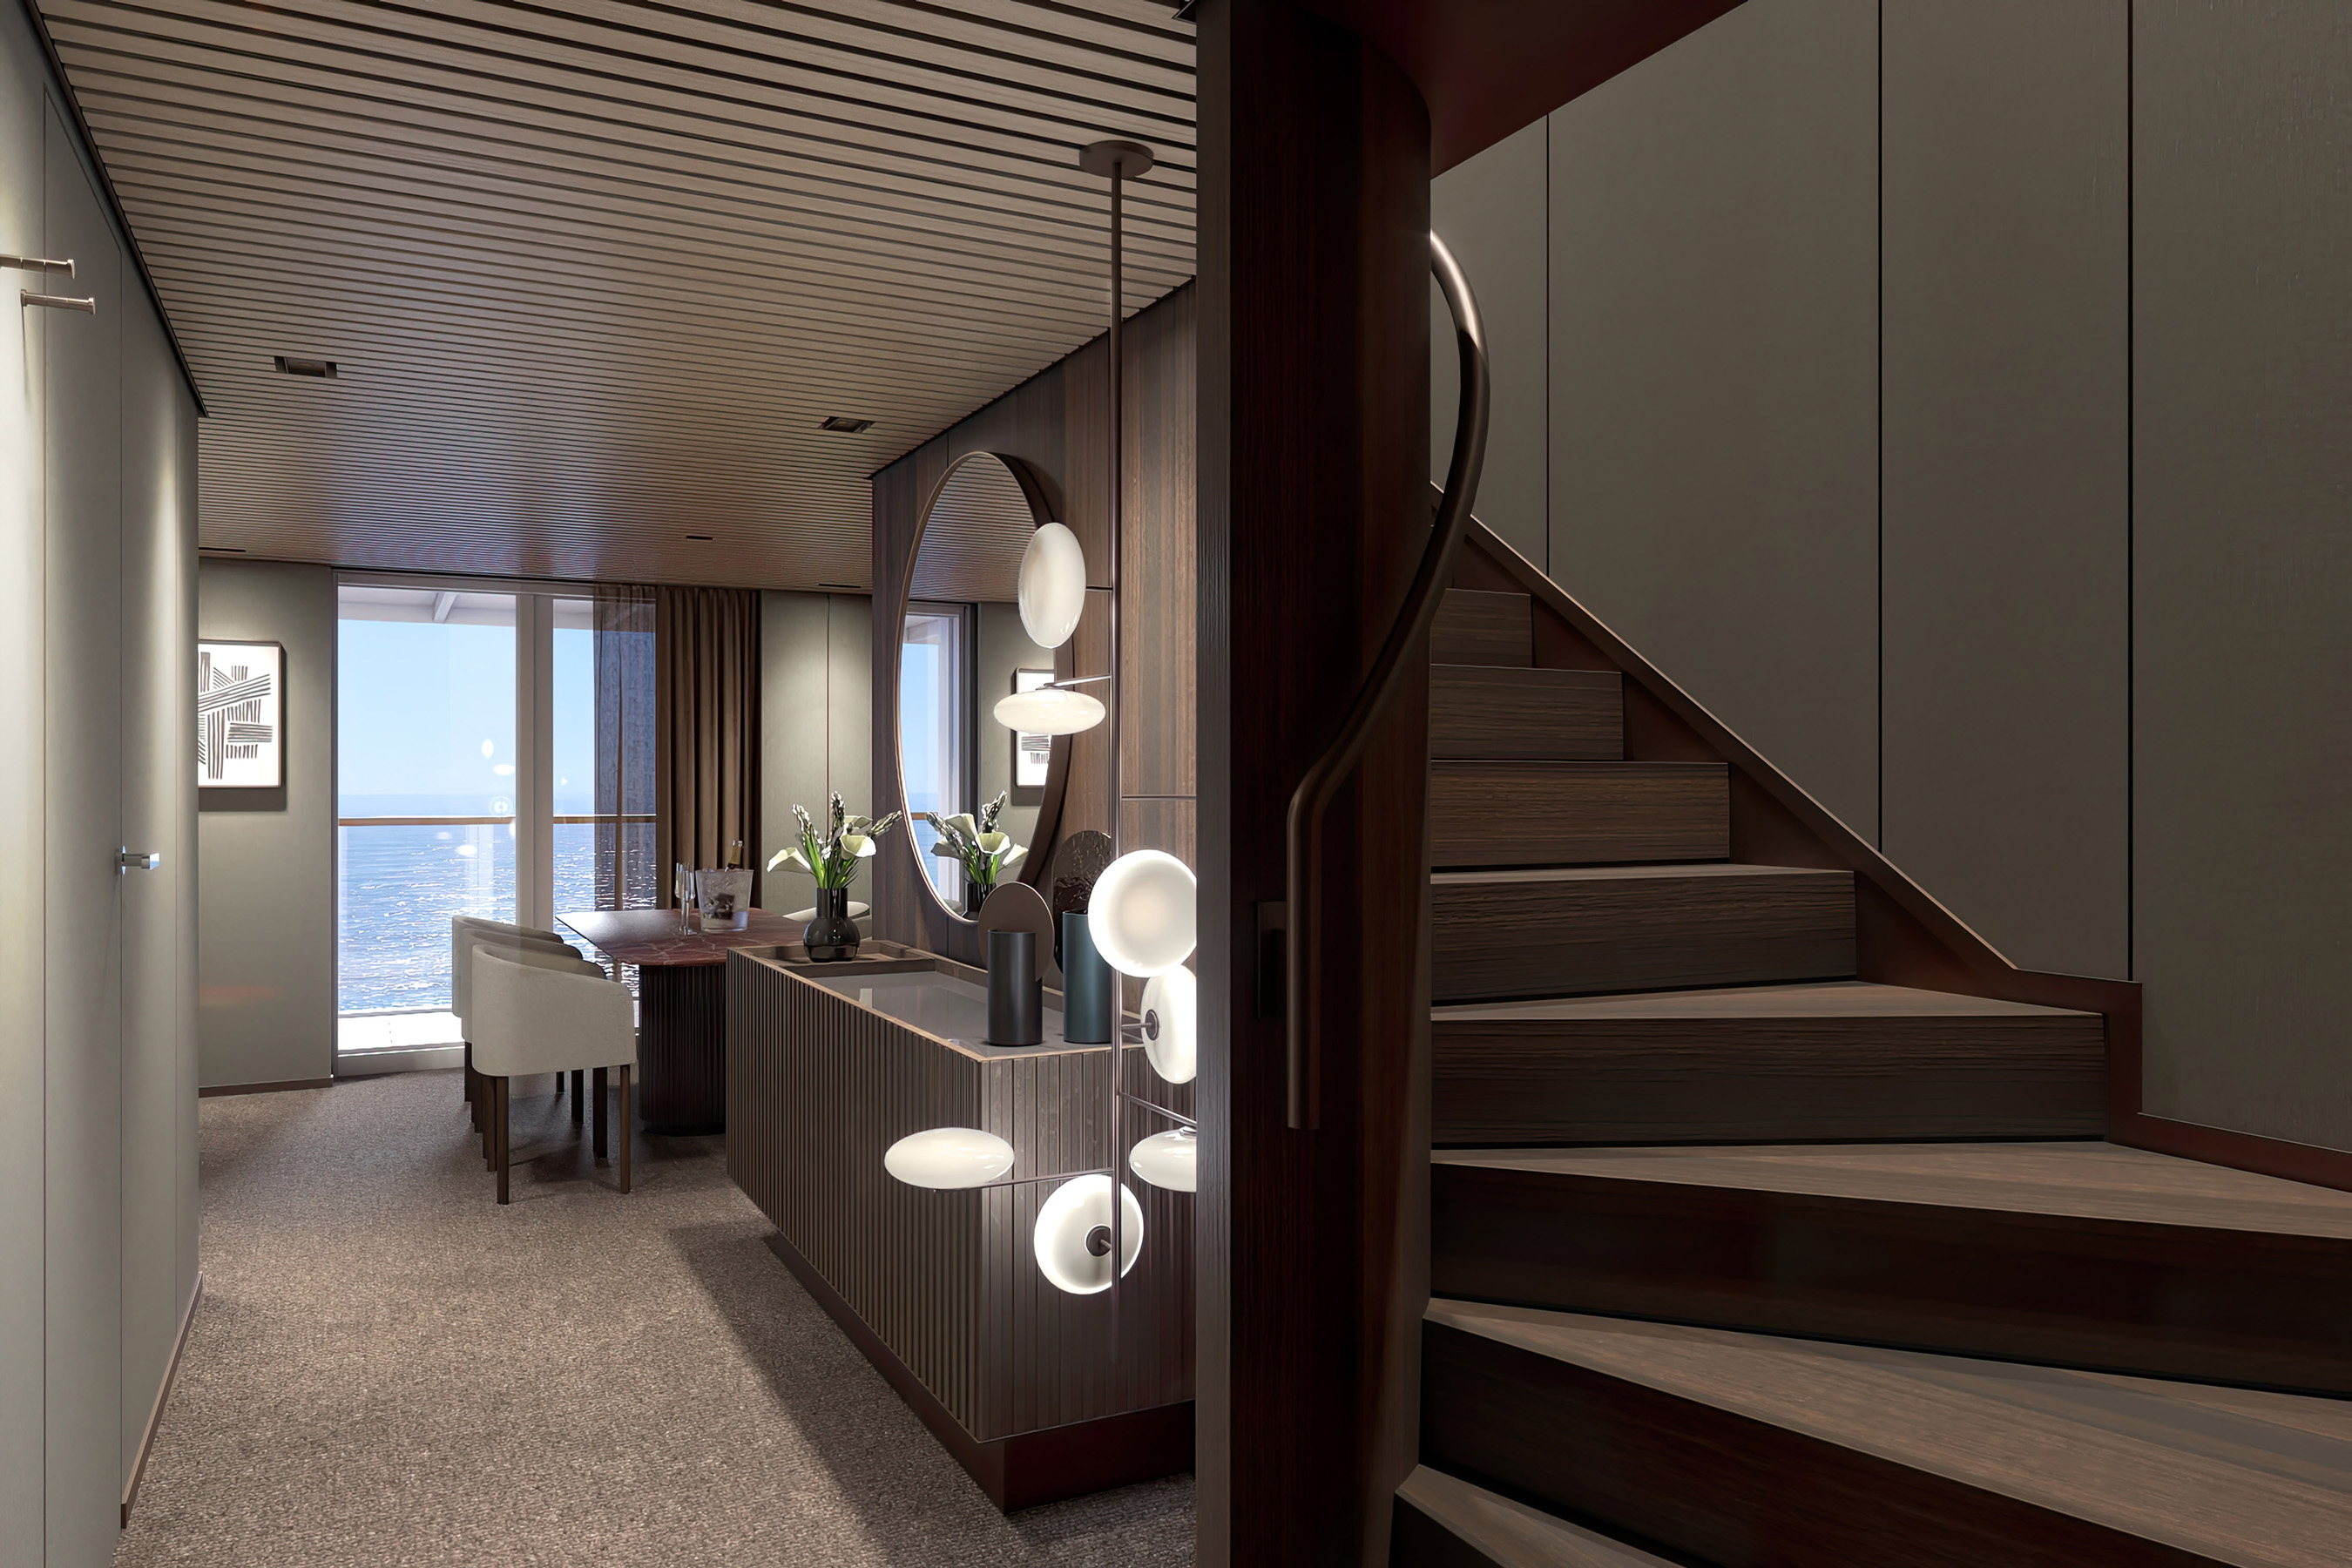 Norwegian Cruise Line’s new three-bedroom Duplex Haven Suites, available exclusively on Norwegian Aqua, span two stories offering guests a spacious home away from home.